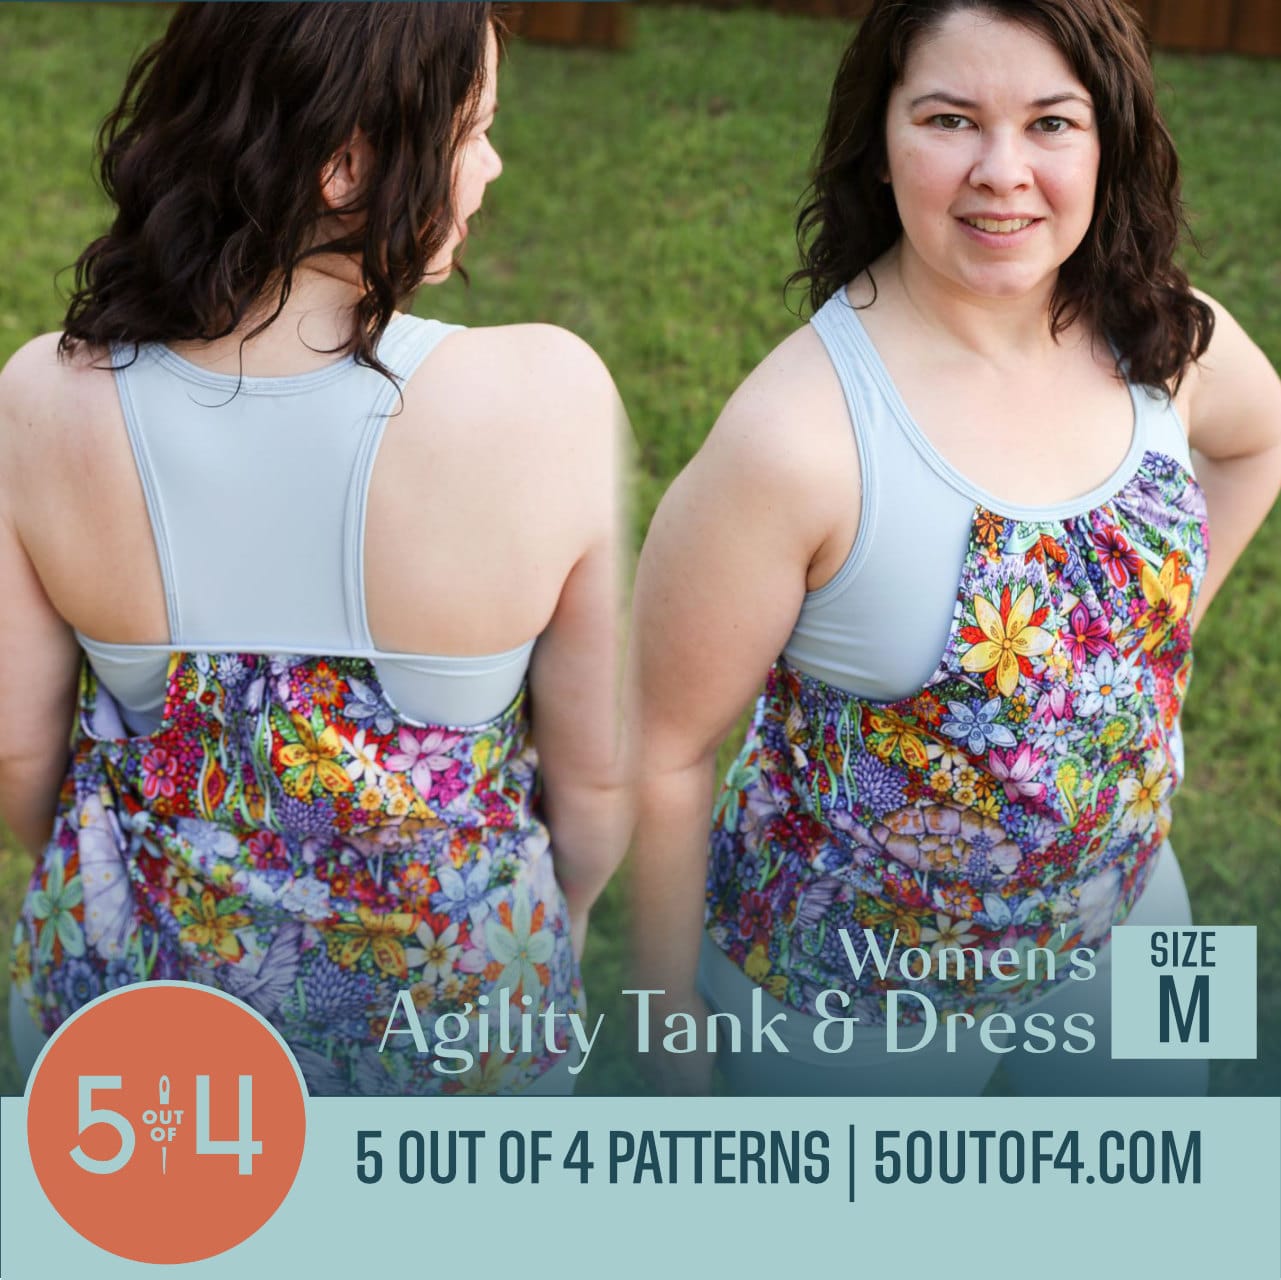 Kids' Agility Tank and Dress - 5 out of 4 Patterns